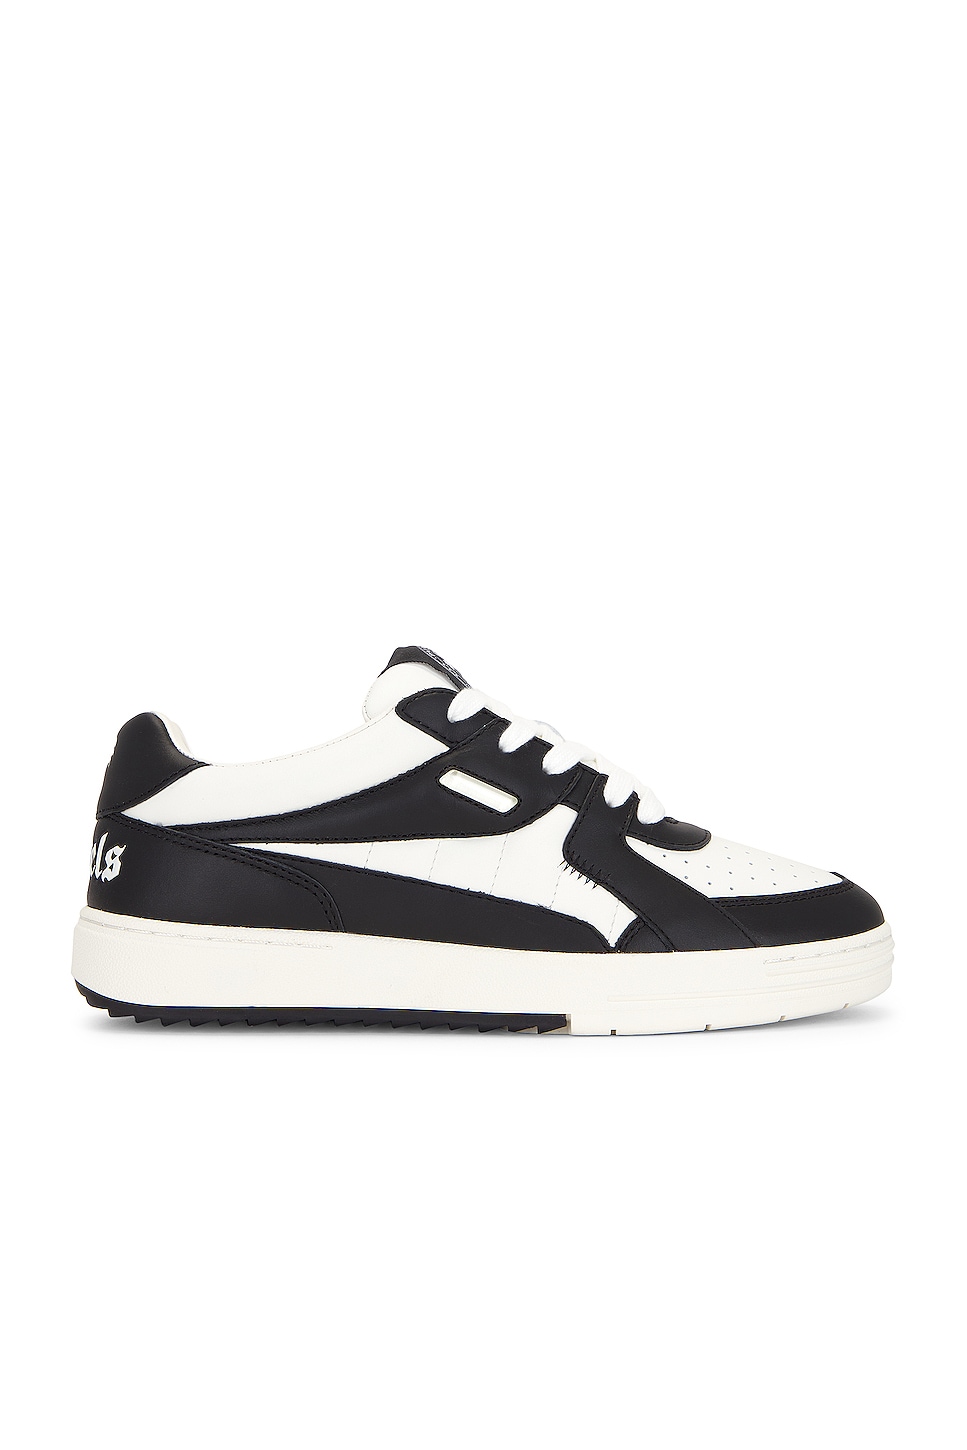 Image 1 of Palm Angels Palm University Sneaker in White & Black